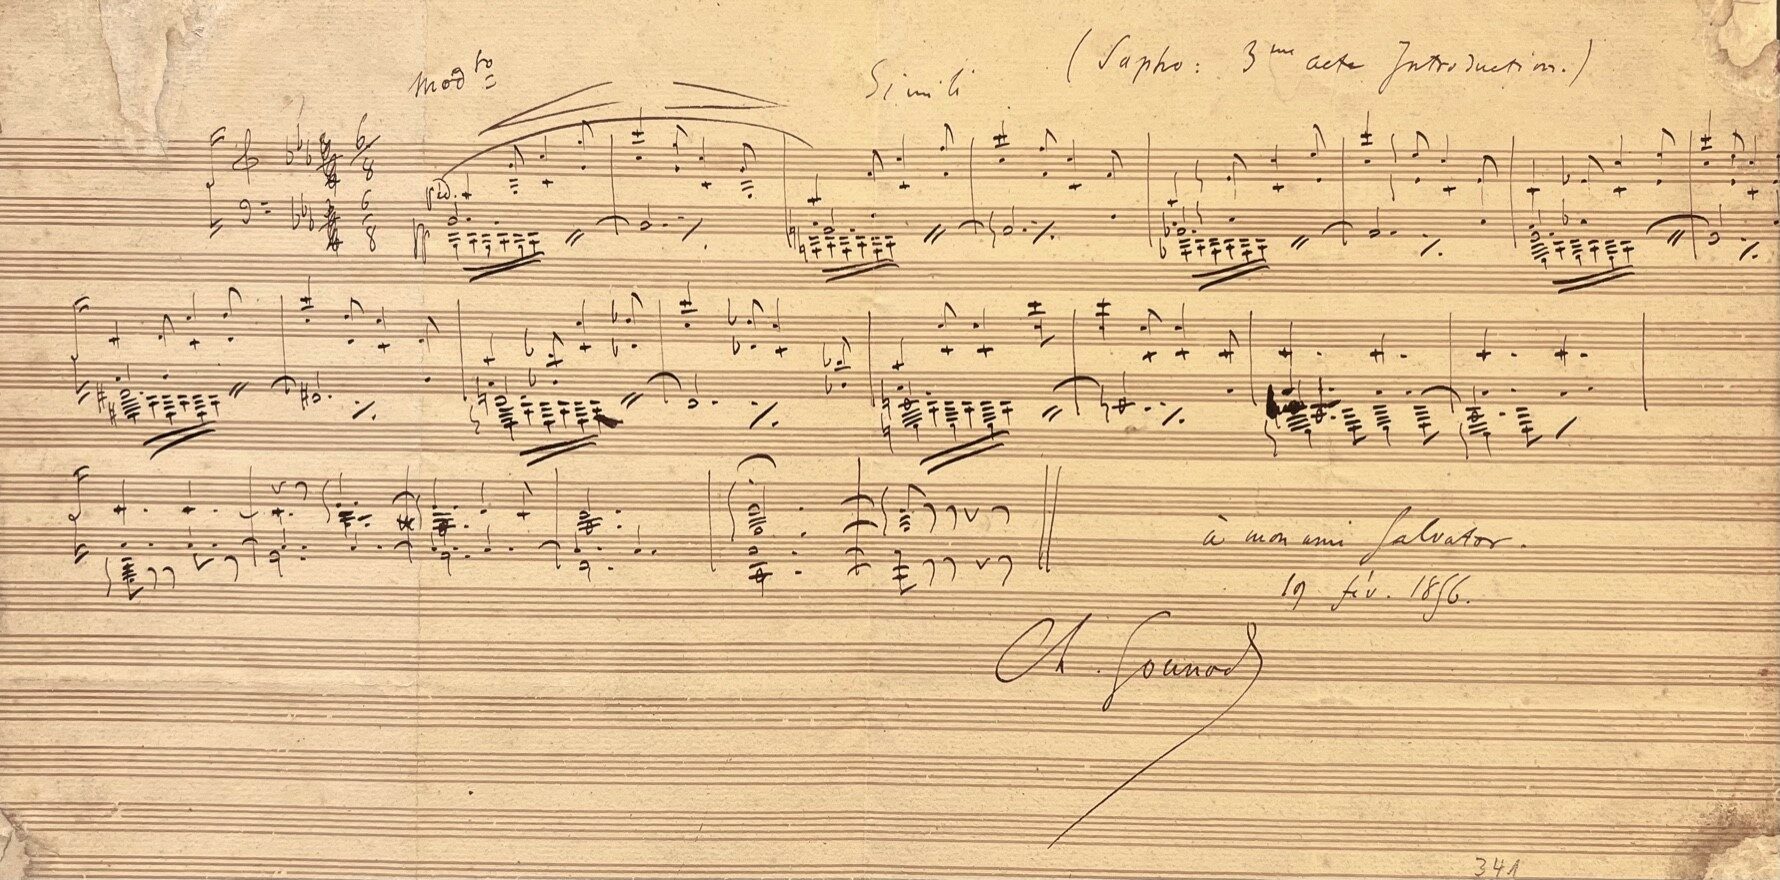 Huge Gounod Quotation from “Sapho”